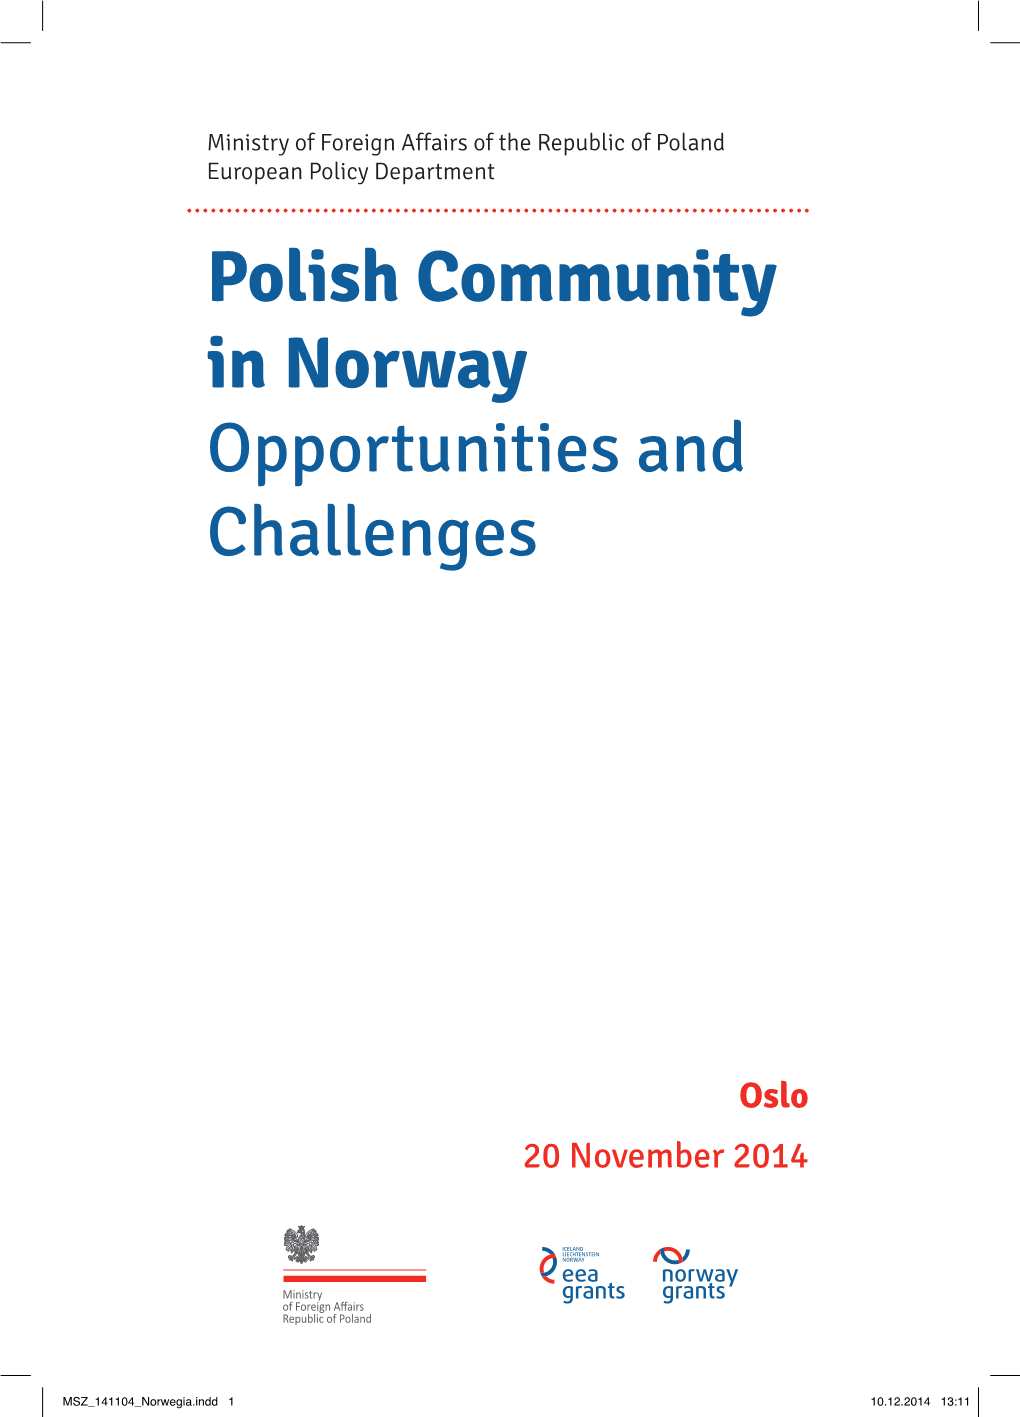 Polish Community in Norway Opportunities and Challenges